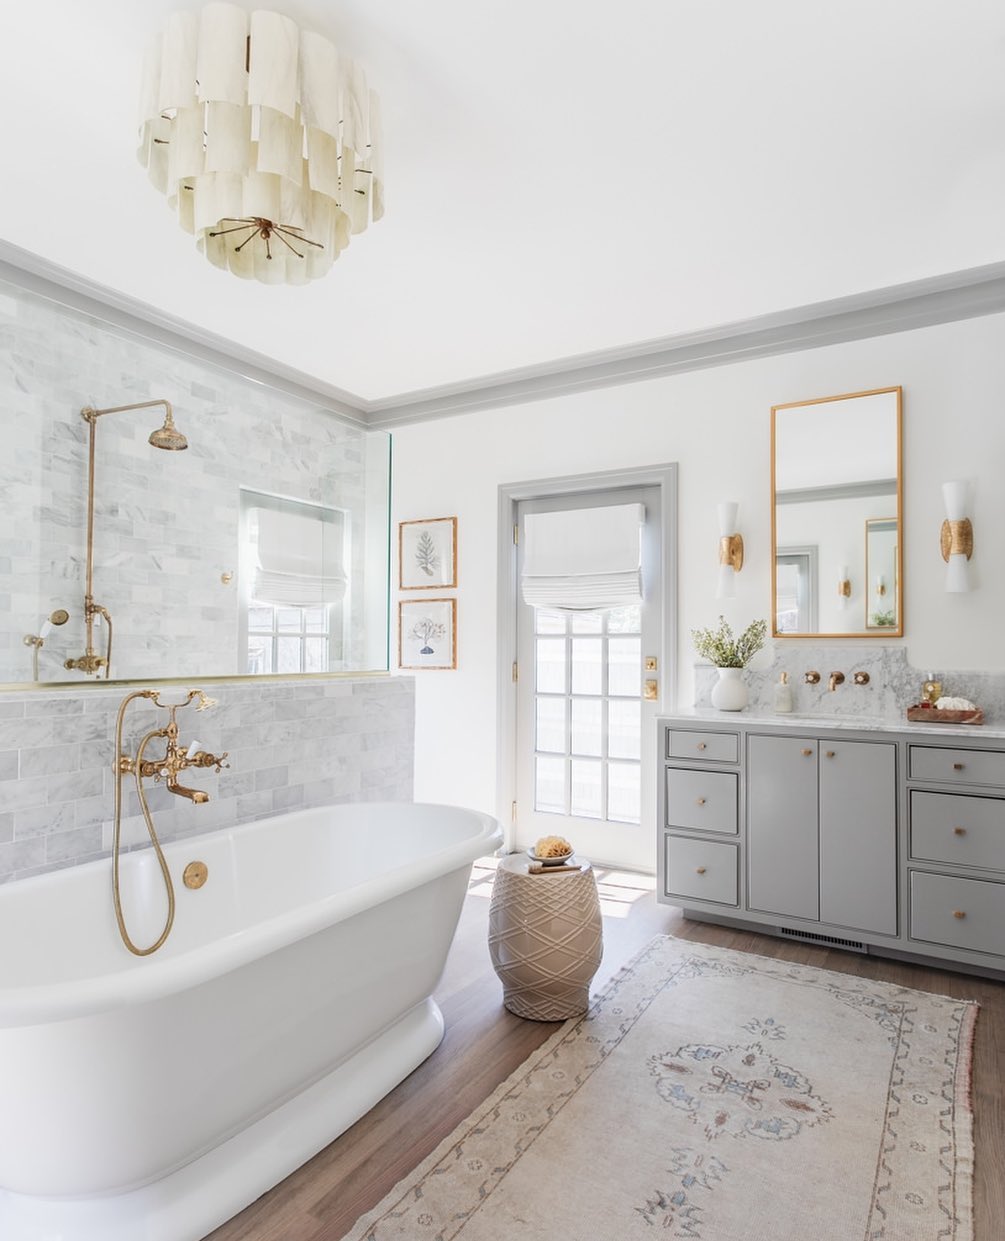 Gray bathroom with a free standing tub and nice rug with a chandelier. Photo by instagram user @emilyhartphoto